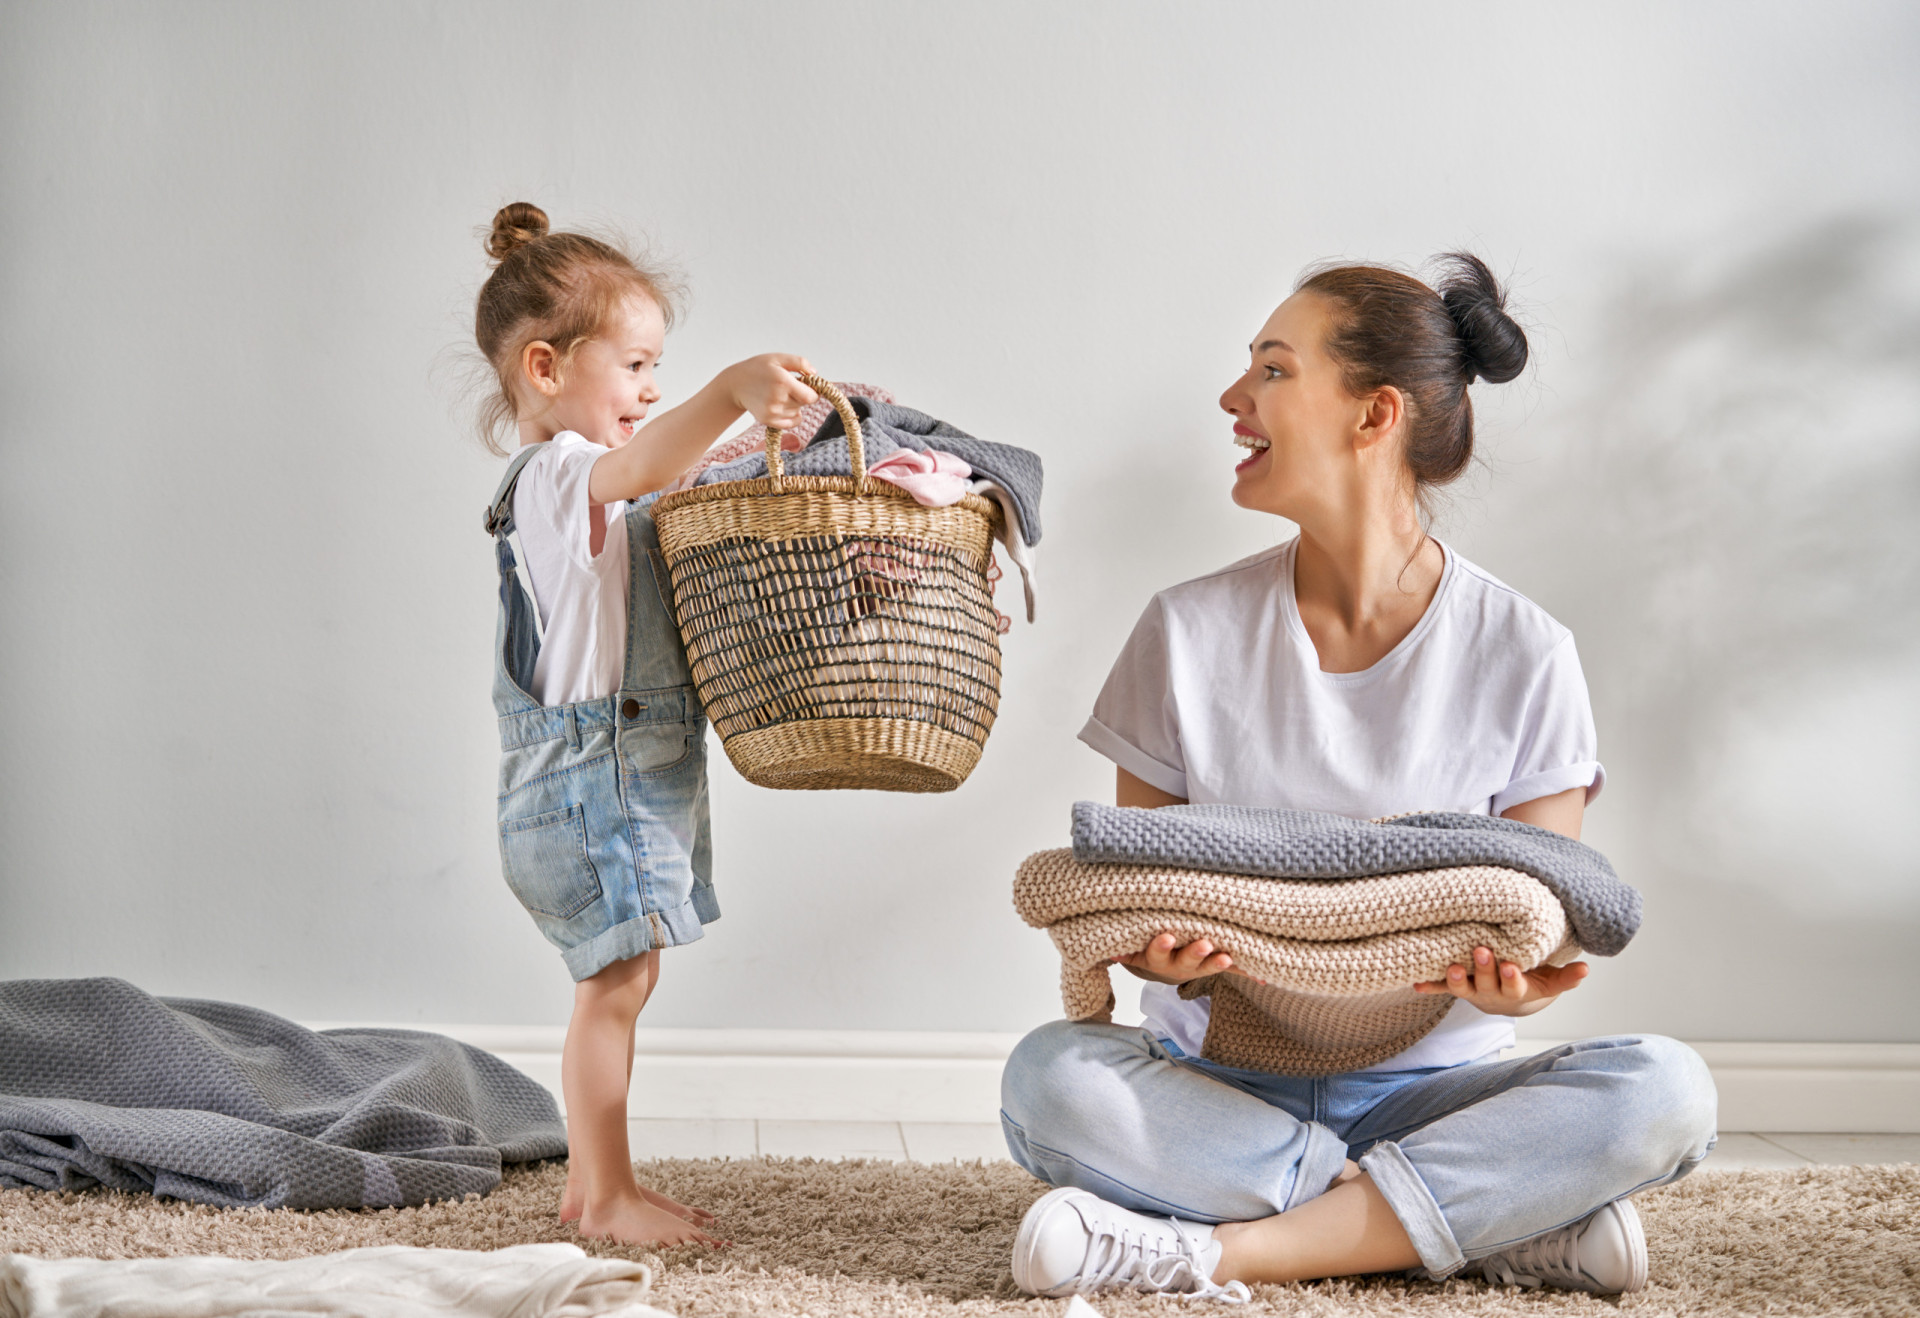 <p>Involving kids in household chores teaches teamwork and responsibility. It's a great way to instill the values of cooperation and contributing to the family.</p><p>You may also like:<a href="https://www.starsinsider.com/n/262952?utm_source=msn.com&utm_medium=display&utm_campaign=referral_description&utm_content=588009en-en"> Alien-looking landscapes you won't believe are found on Earth</a></p>